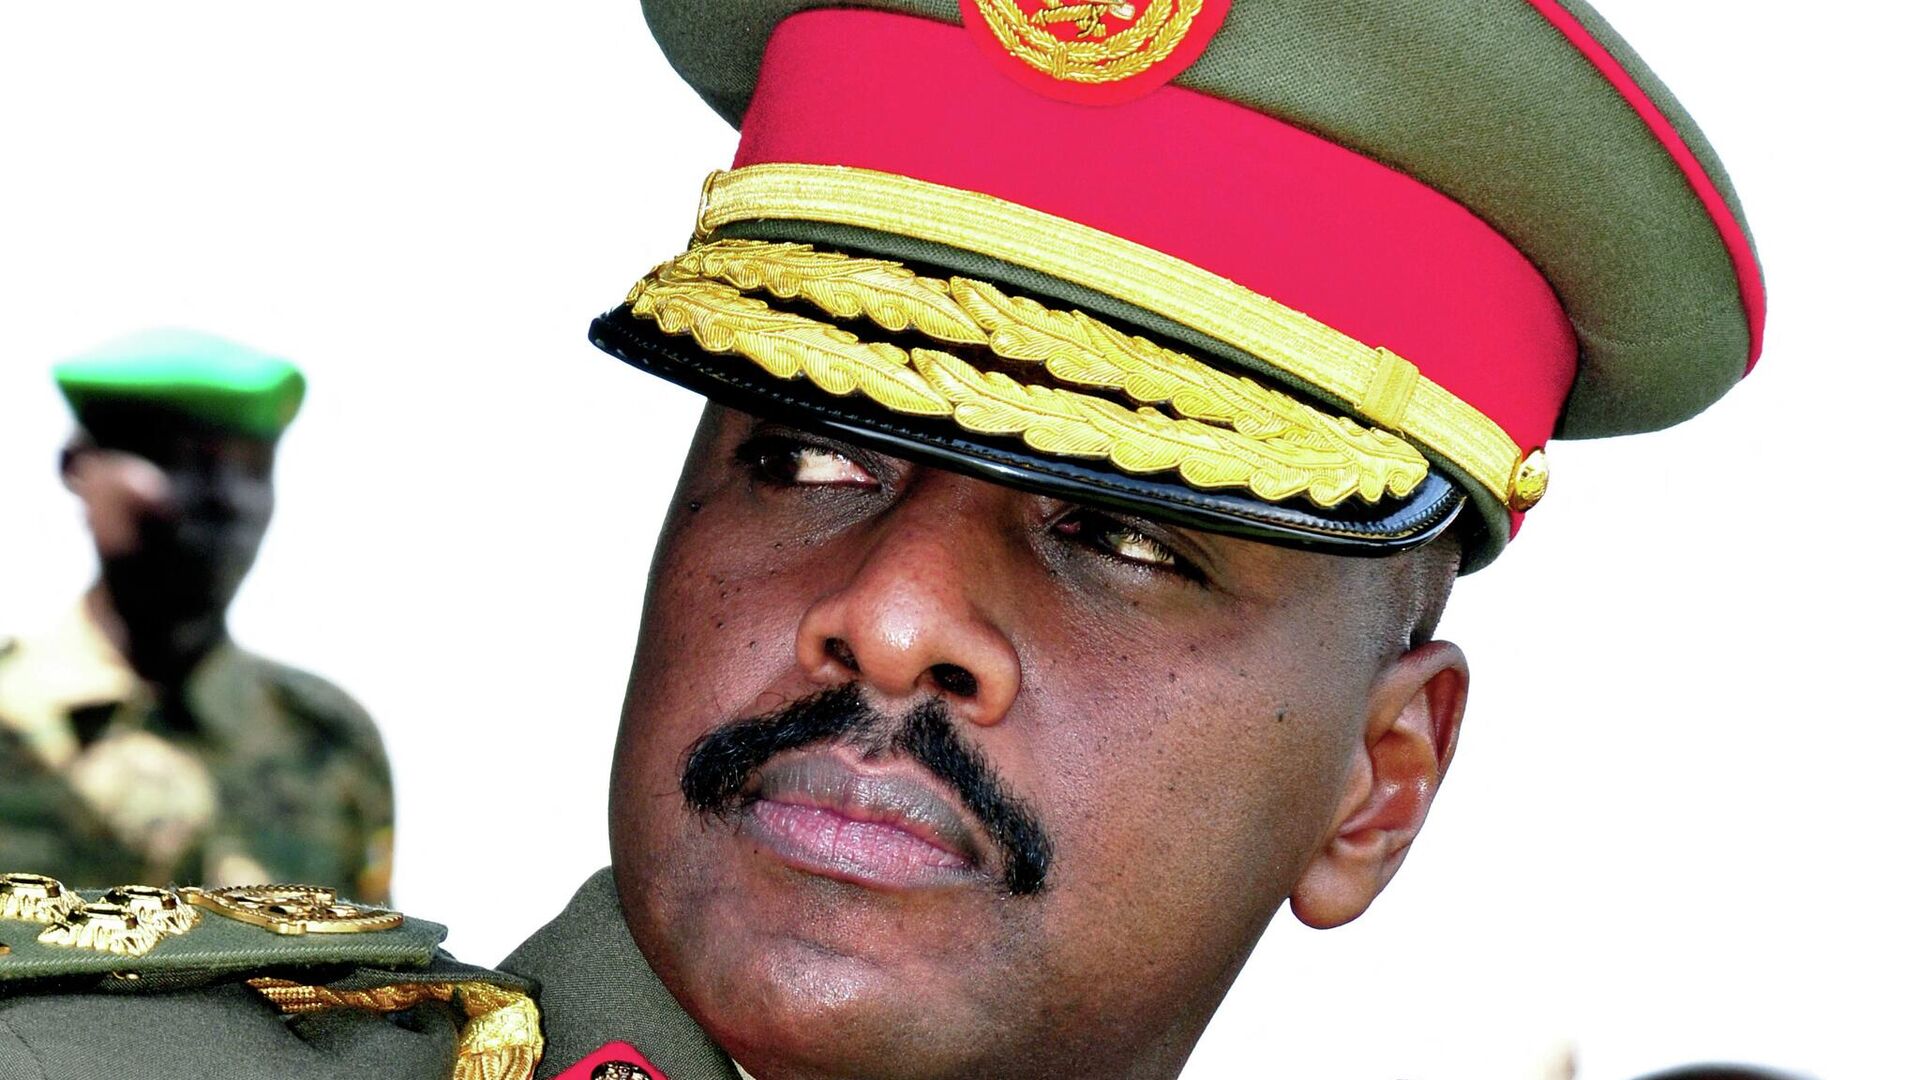 The son of Uganda's President Yoweri Museveni, Major General Muhoozi Kainerugaba attends a ceremony in which he was promoted from Brigadier to Major General at the country's military headquarters in Kampala on May 25, 2016. - The son of Uganda's President Yoweri Museveni, one of Africa's longest-serving leaders, has rejected claims that he plans to succeed his father, reports said Thursday. Muhoozi Kainerugaba, speaking on May 25 after he was promoted from Brigadier to Major General, heading the Special Forces Command (SFC), said he was happy with being in the military, the government-owned New Vision newspaper reported. (Photo by PETER BUSOMOKE / AFP) - Sputnik International, 1920, 25.09.2022